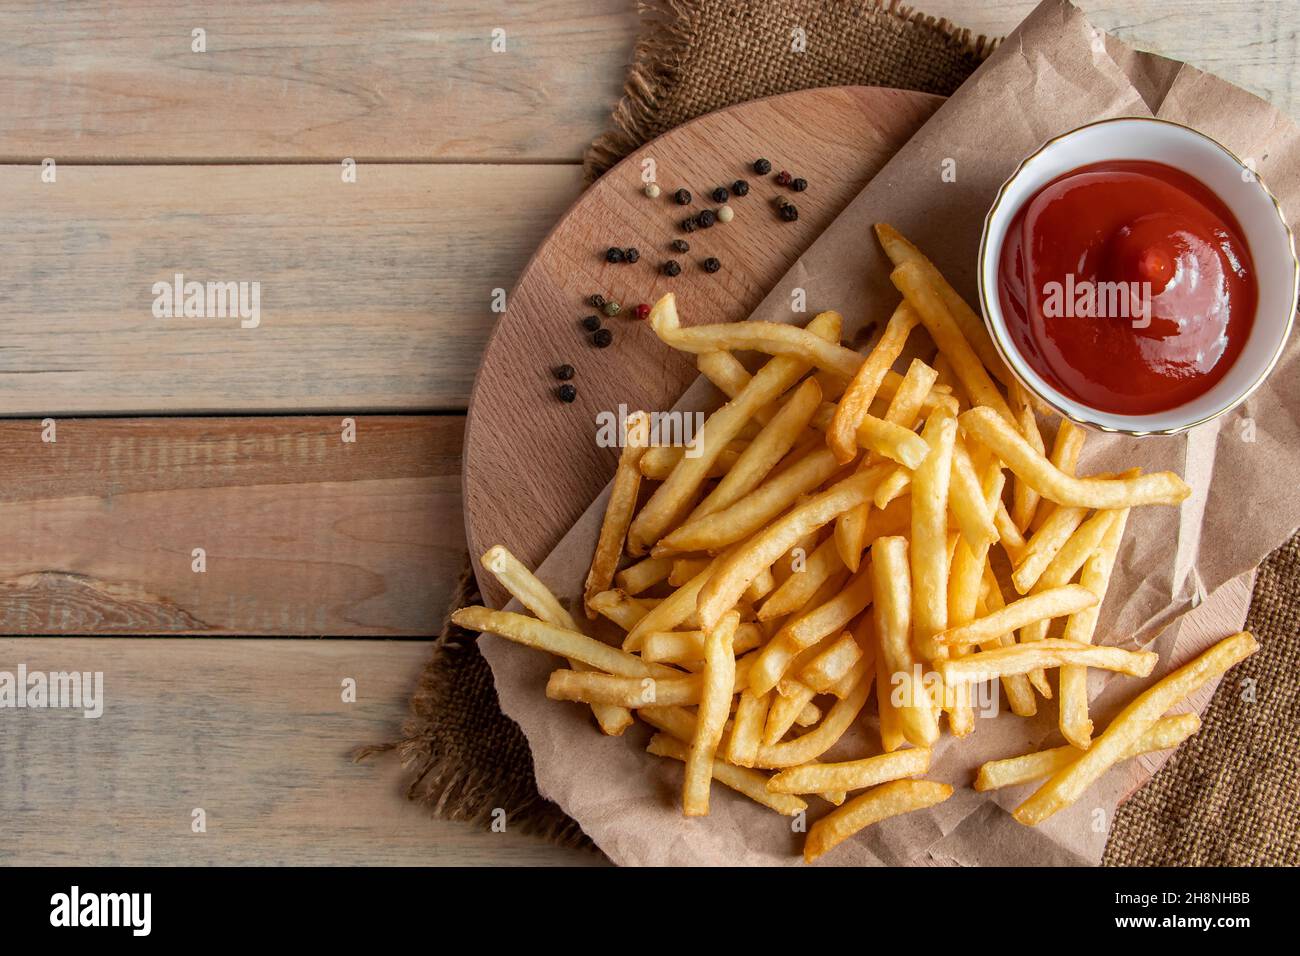 Hot golden french fries with ketchup on wooden background. Tasty american fast food. Place for text Stock Photo